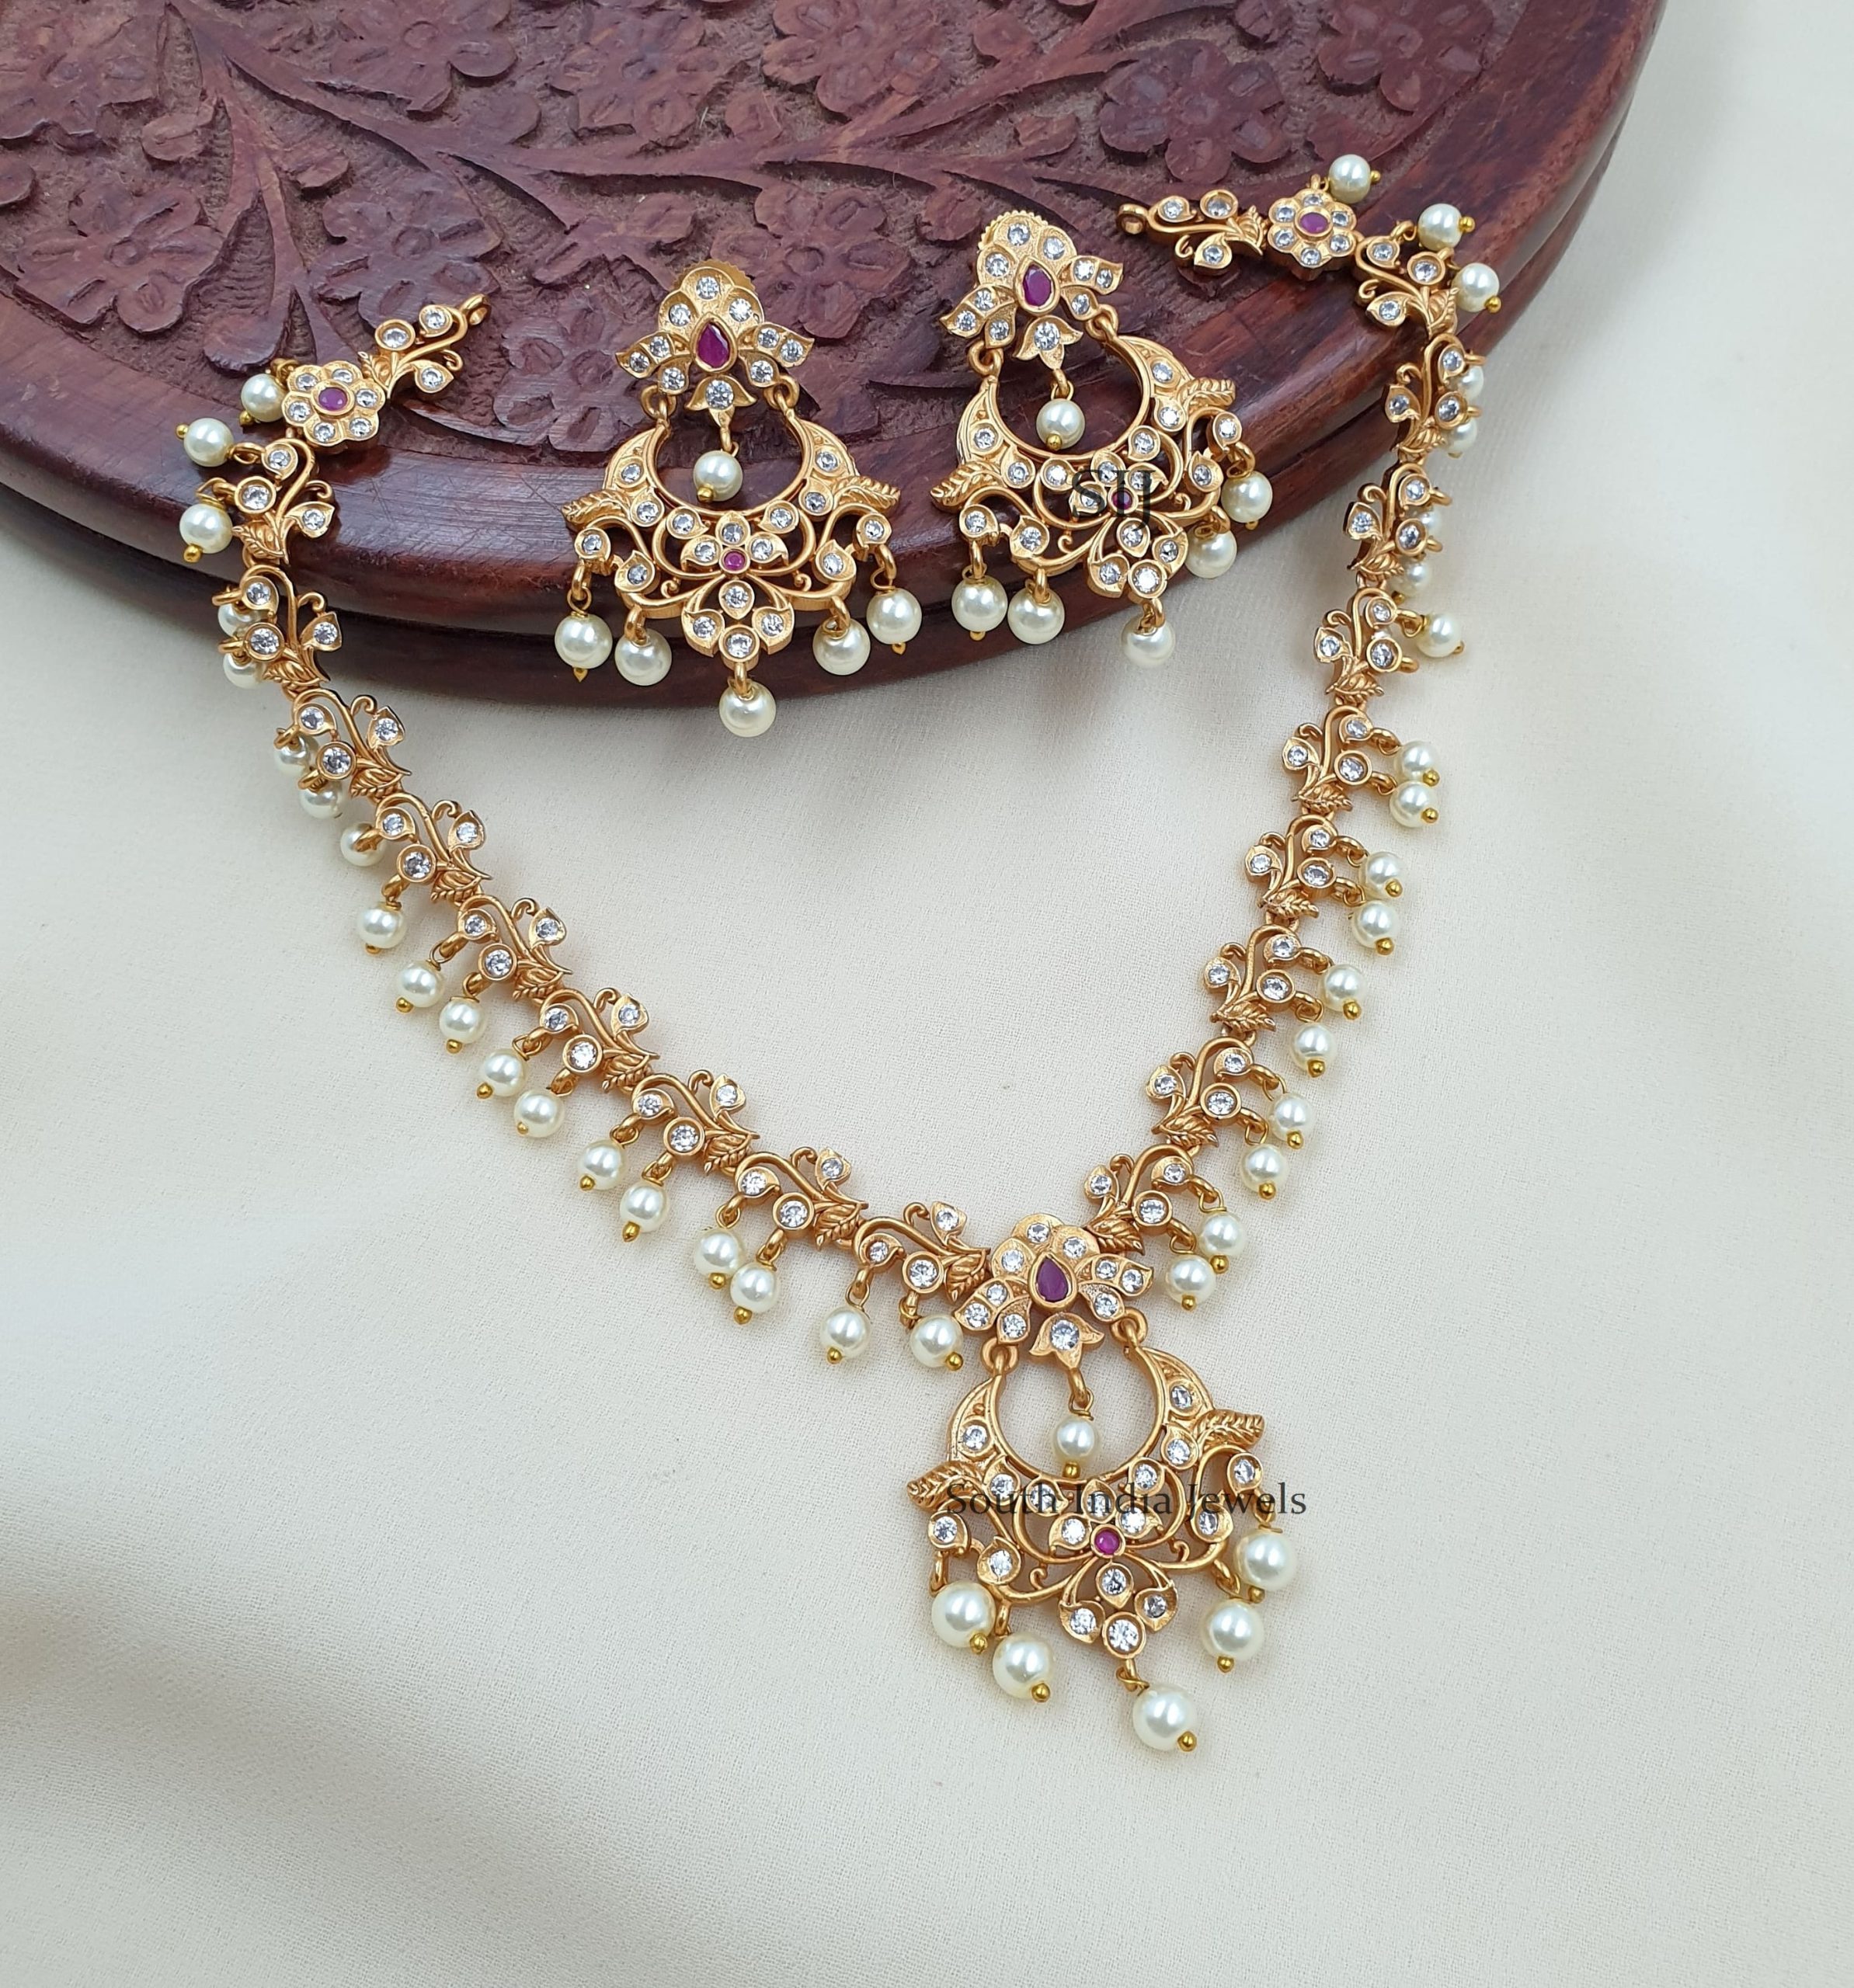 Cute white stones and pearls necklace with stunning earrings. 